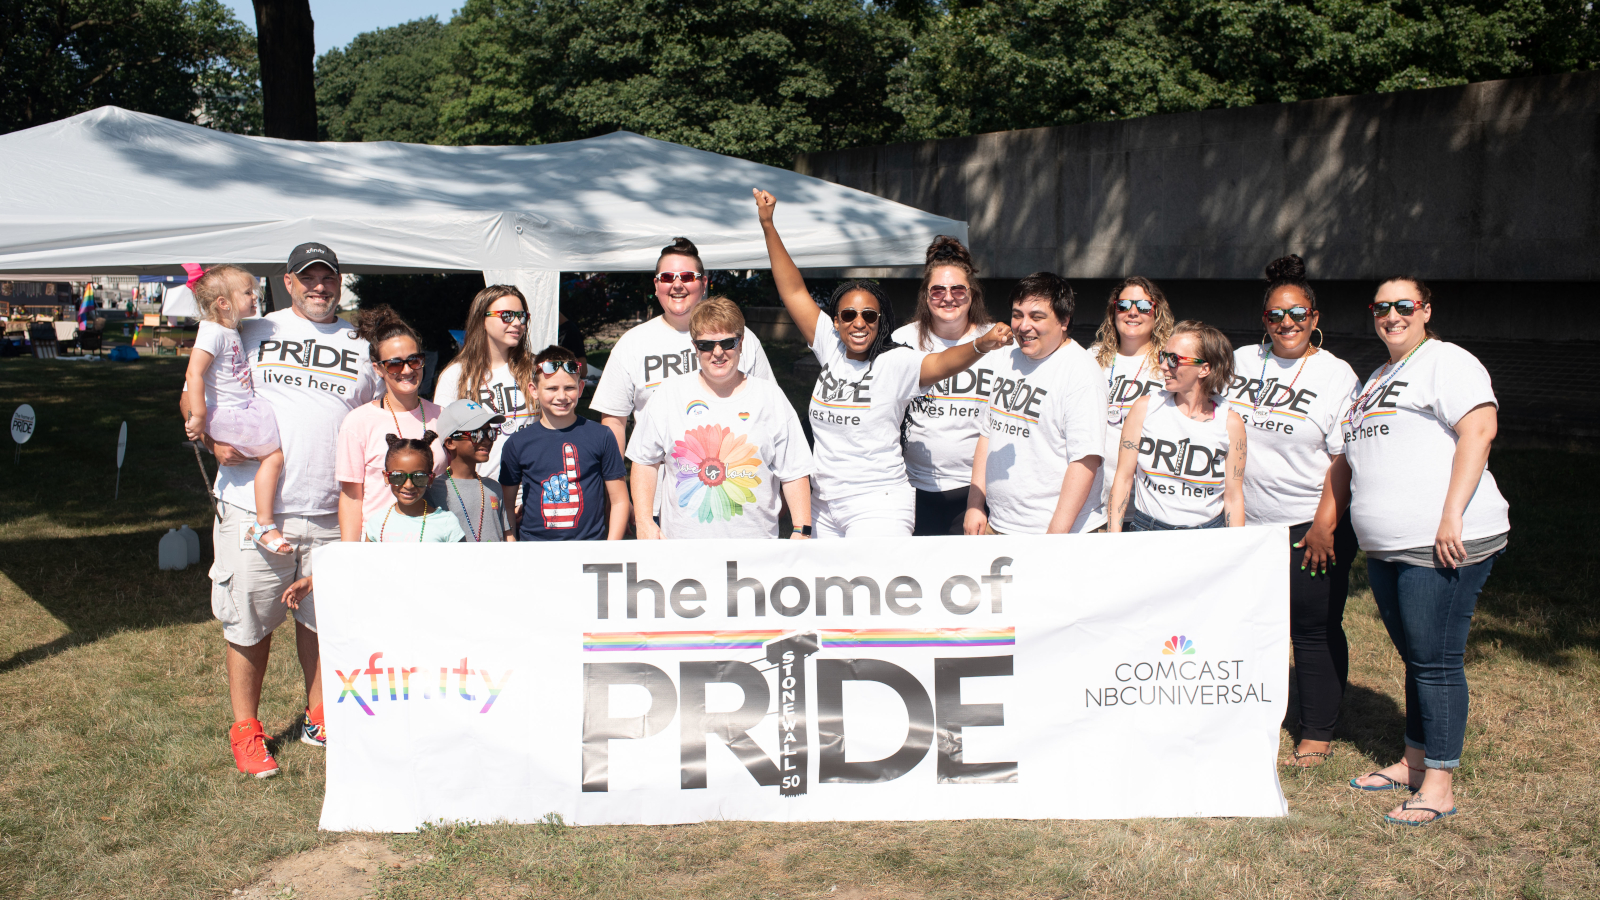 Comcast volunteers hold up a banner commemorating Pride month.